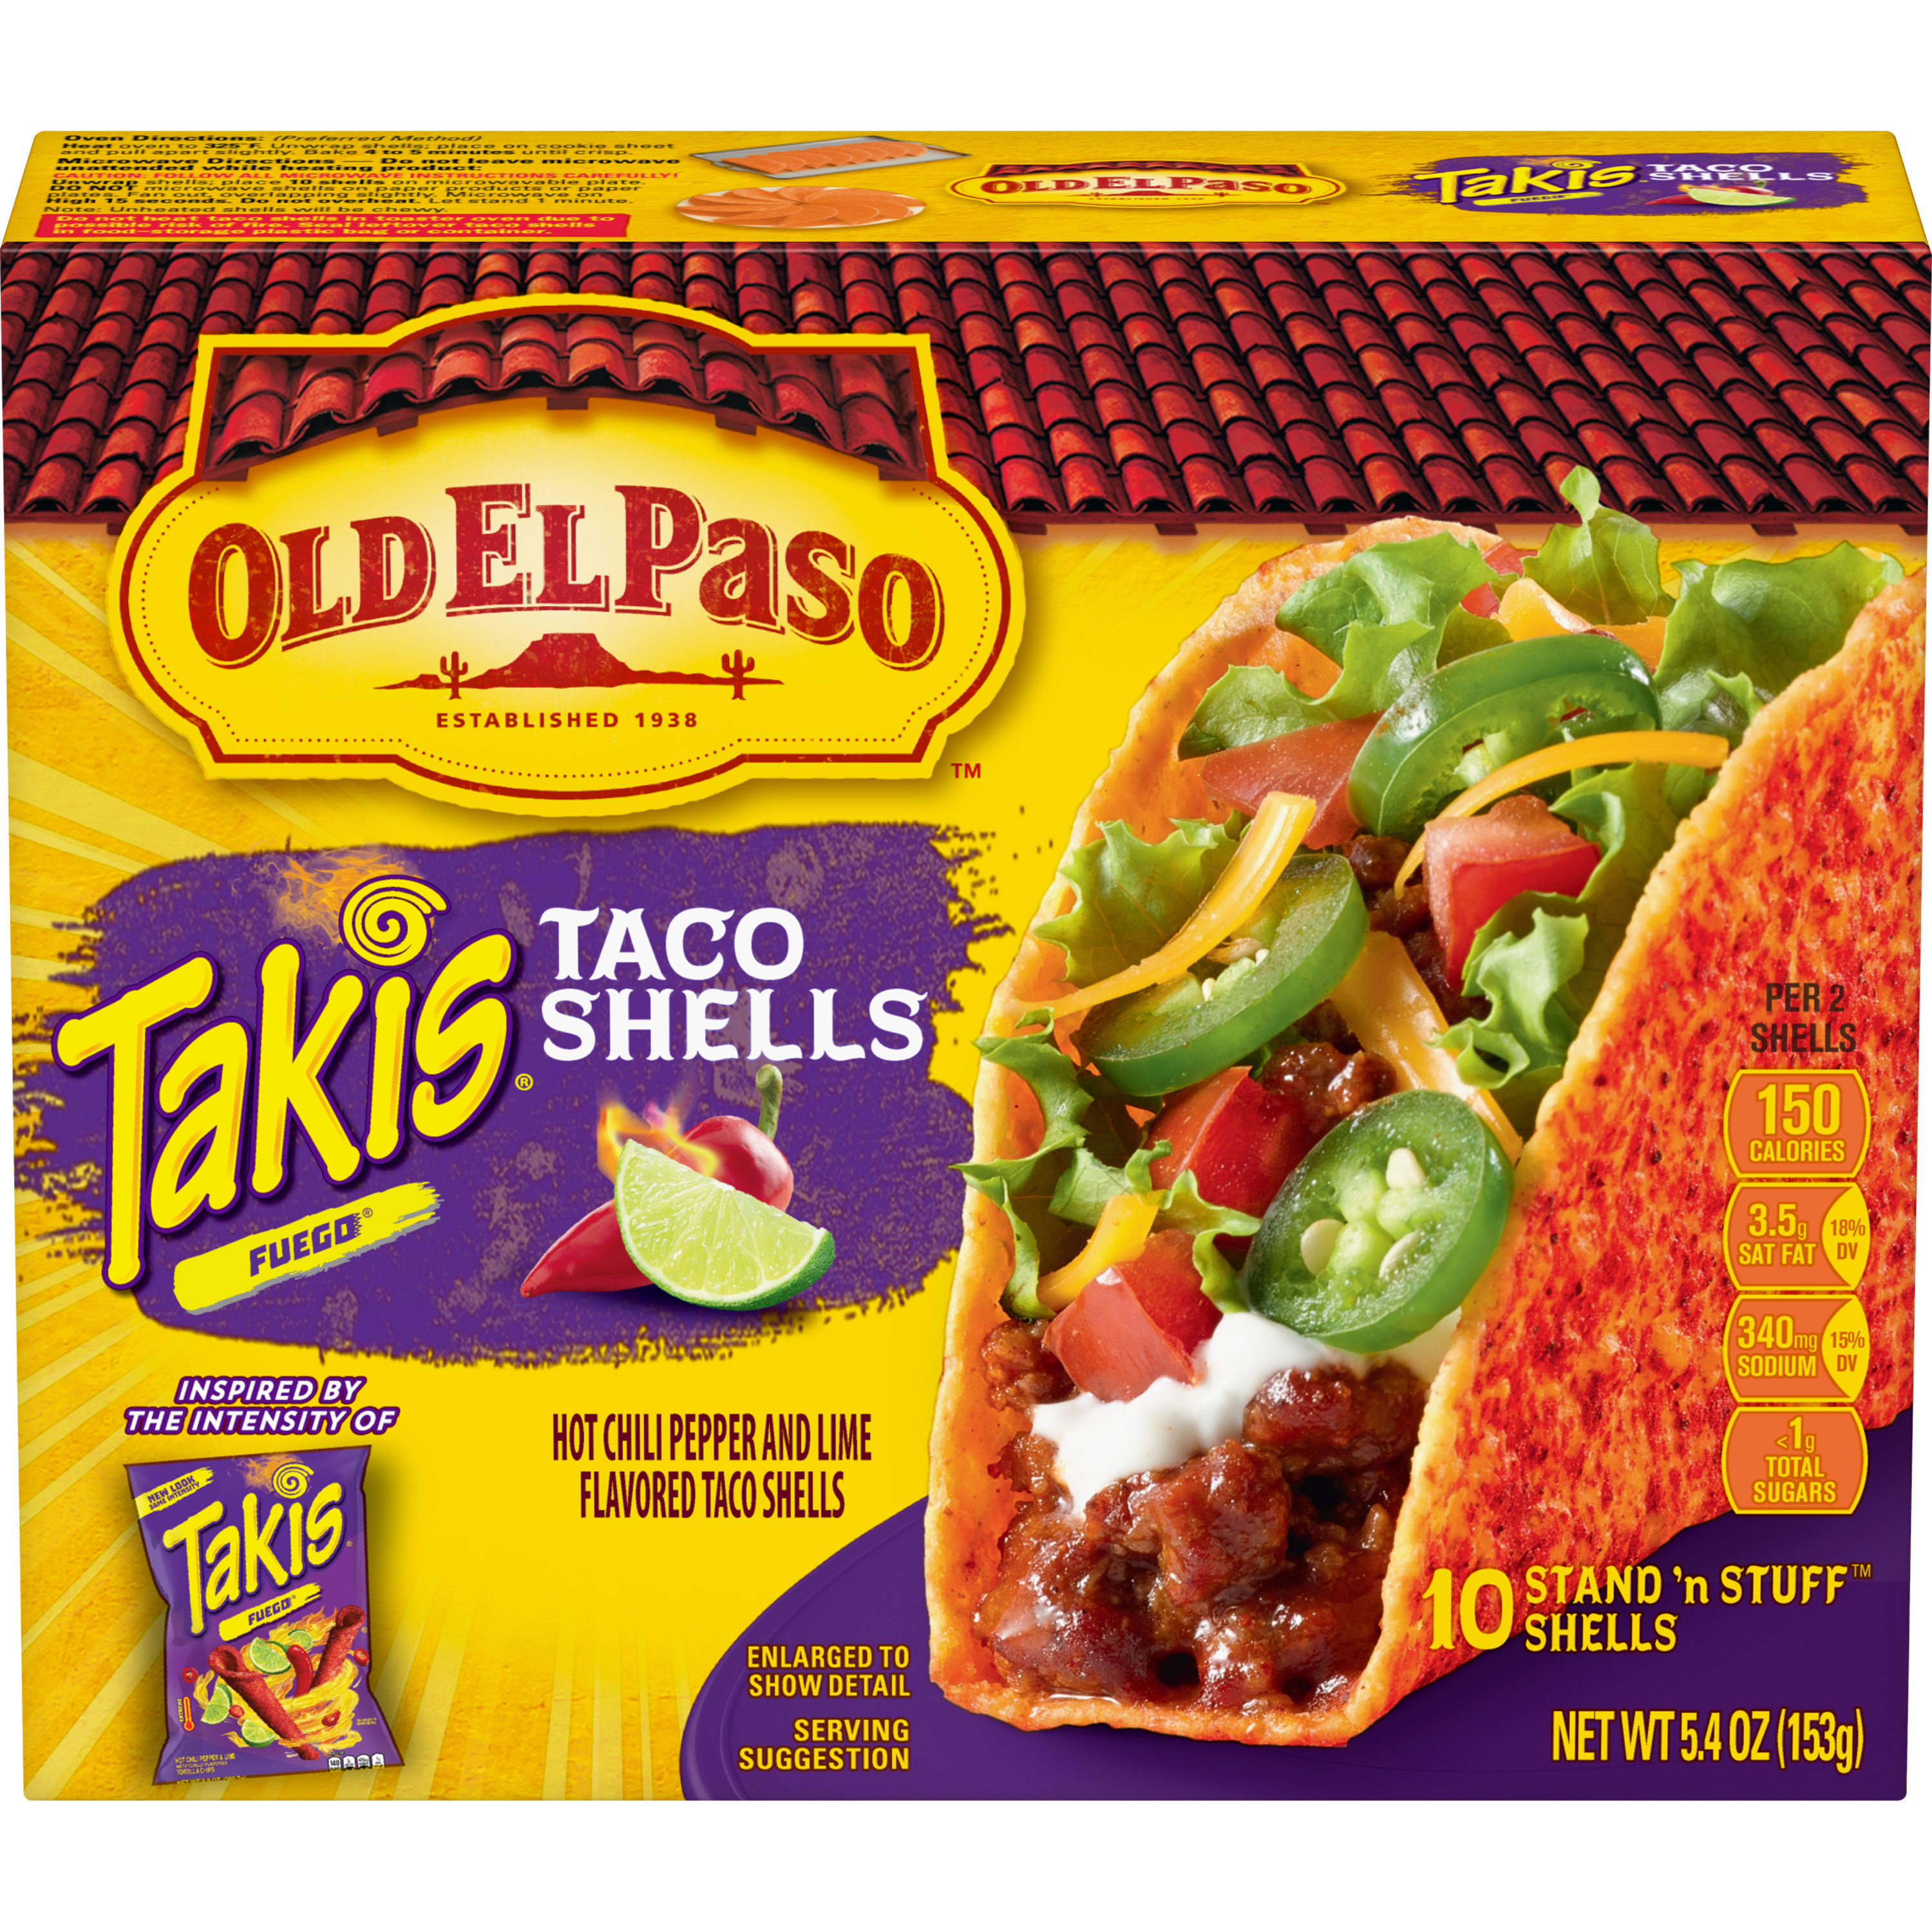 Paso ™ Brings the Intensity of TAKIS FUEGO ® to Taco Night With New Hot Chi...